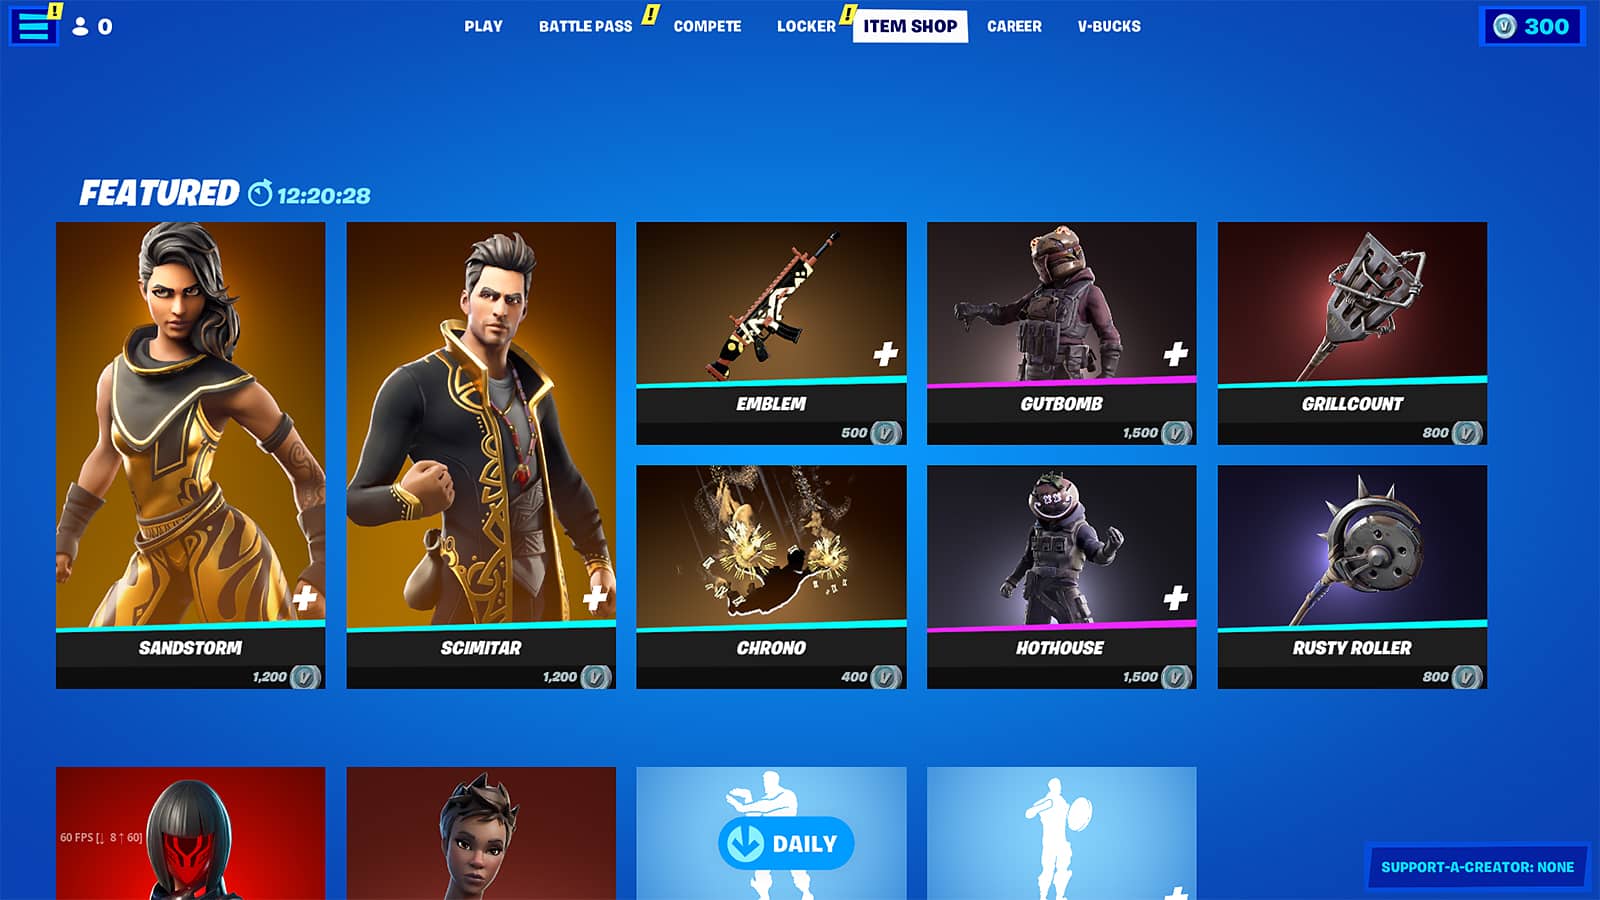 An image of the item shop in Fortnite